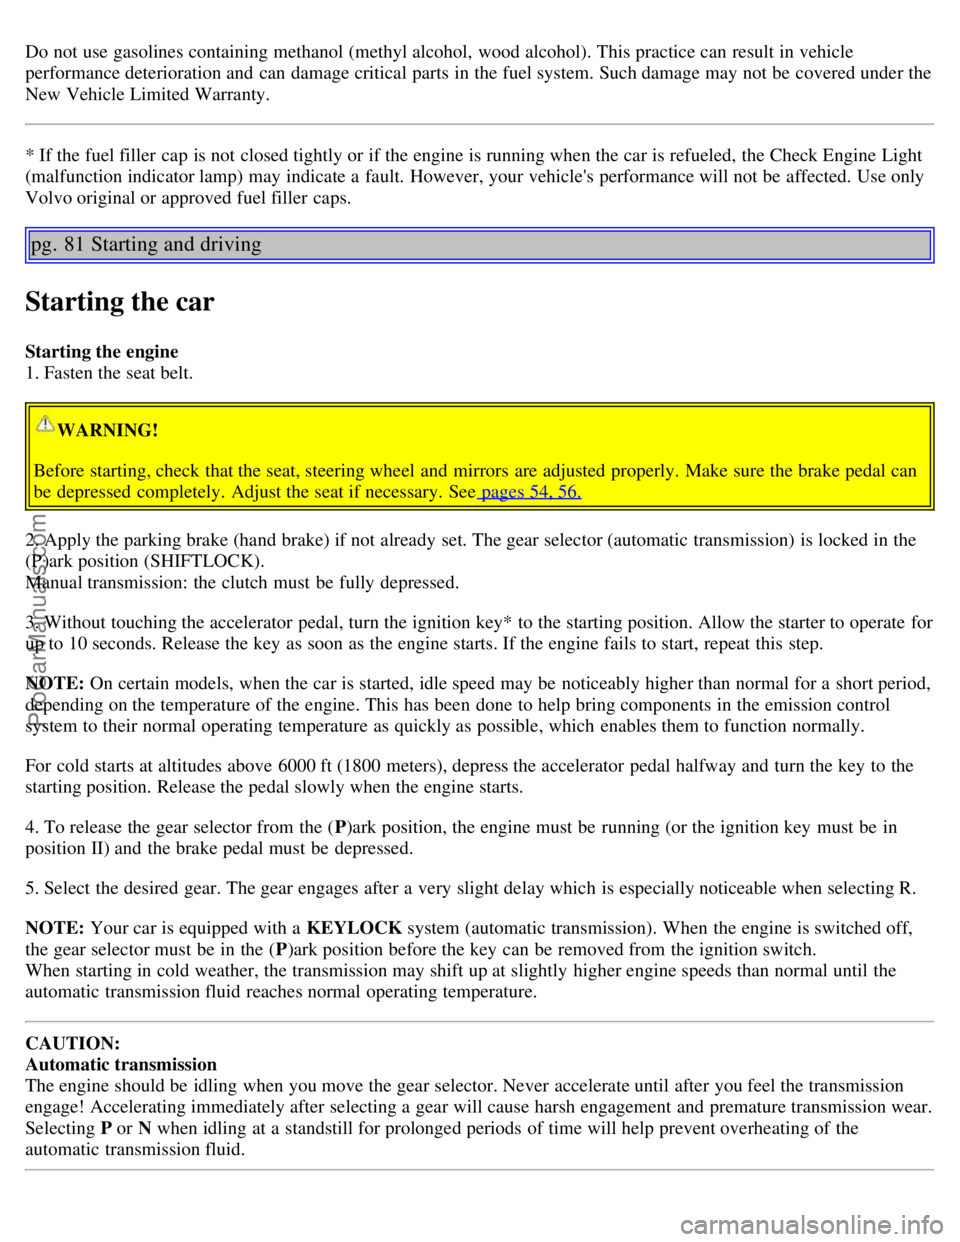 VOLVO S60 2003  Owners Manual Do not use gasolines containing methanol (methyl alcohol,  wood alcohol). This practice can result in vehicle
performance deterioration and  can damage critical parts  in the fuel system. Such damage 